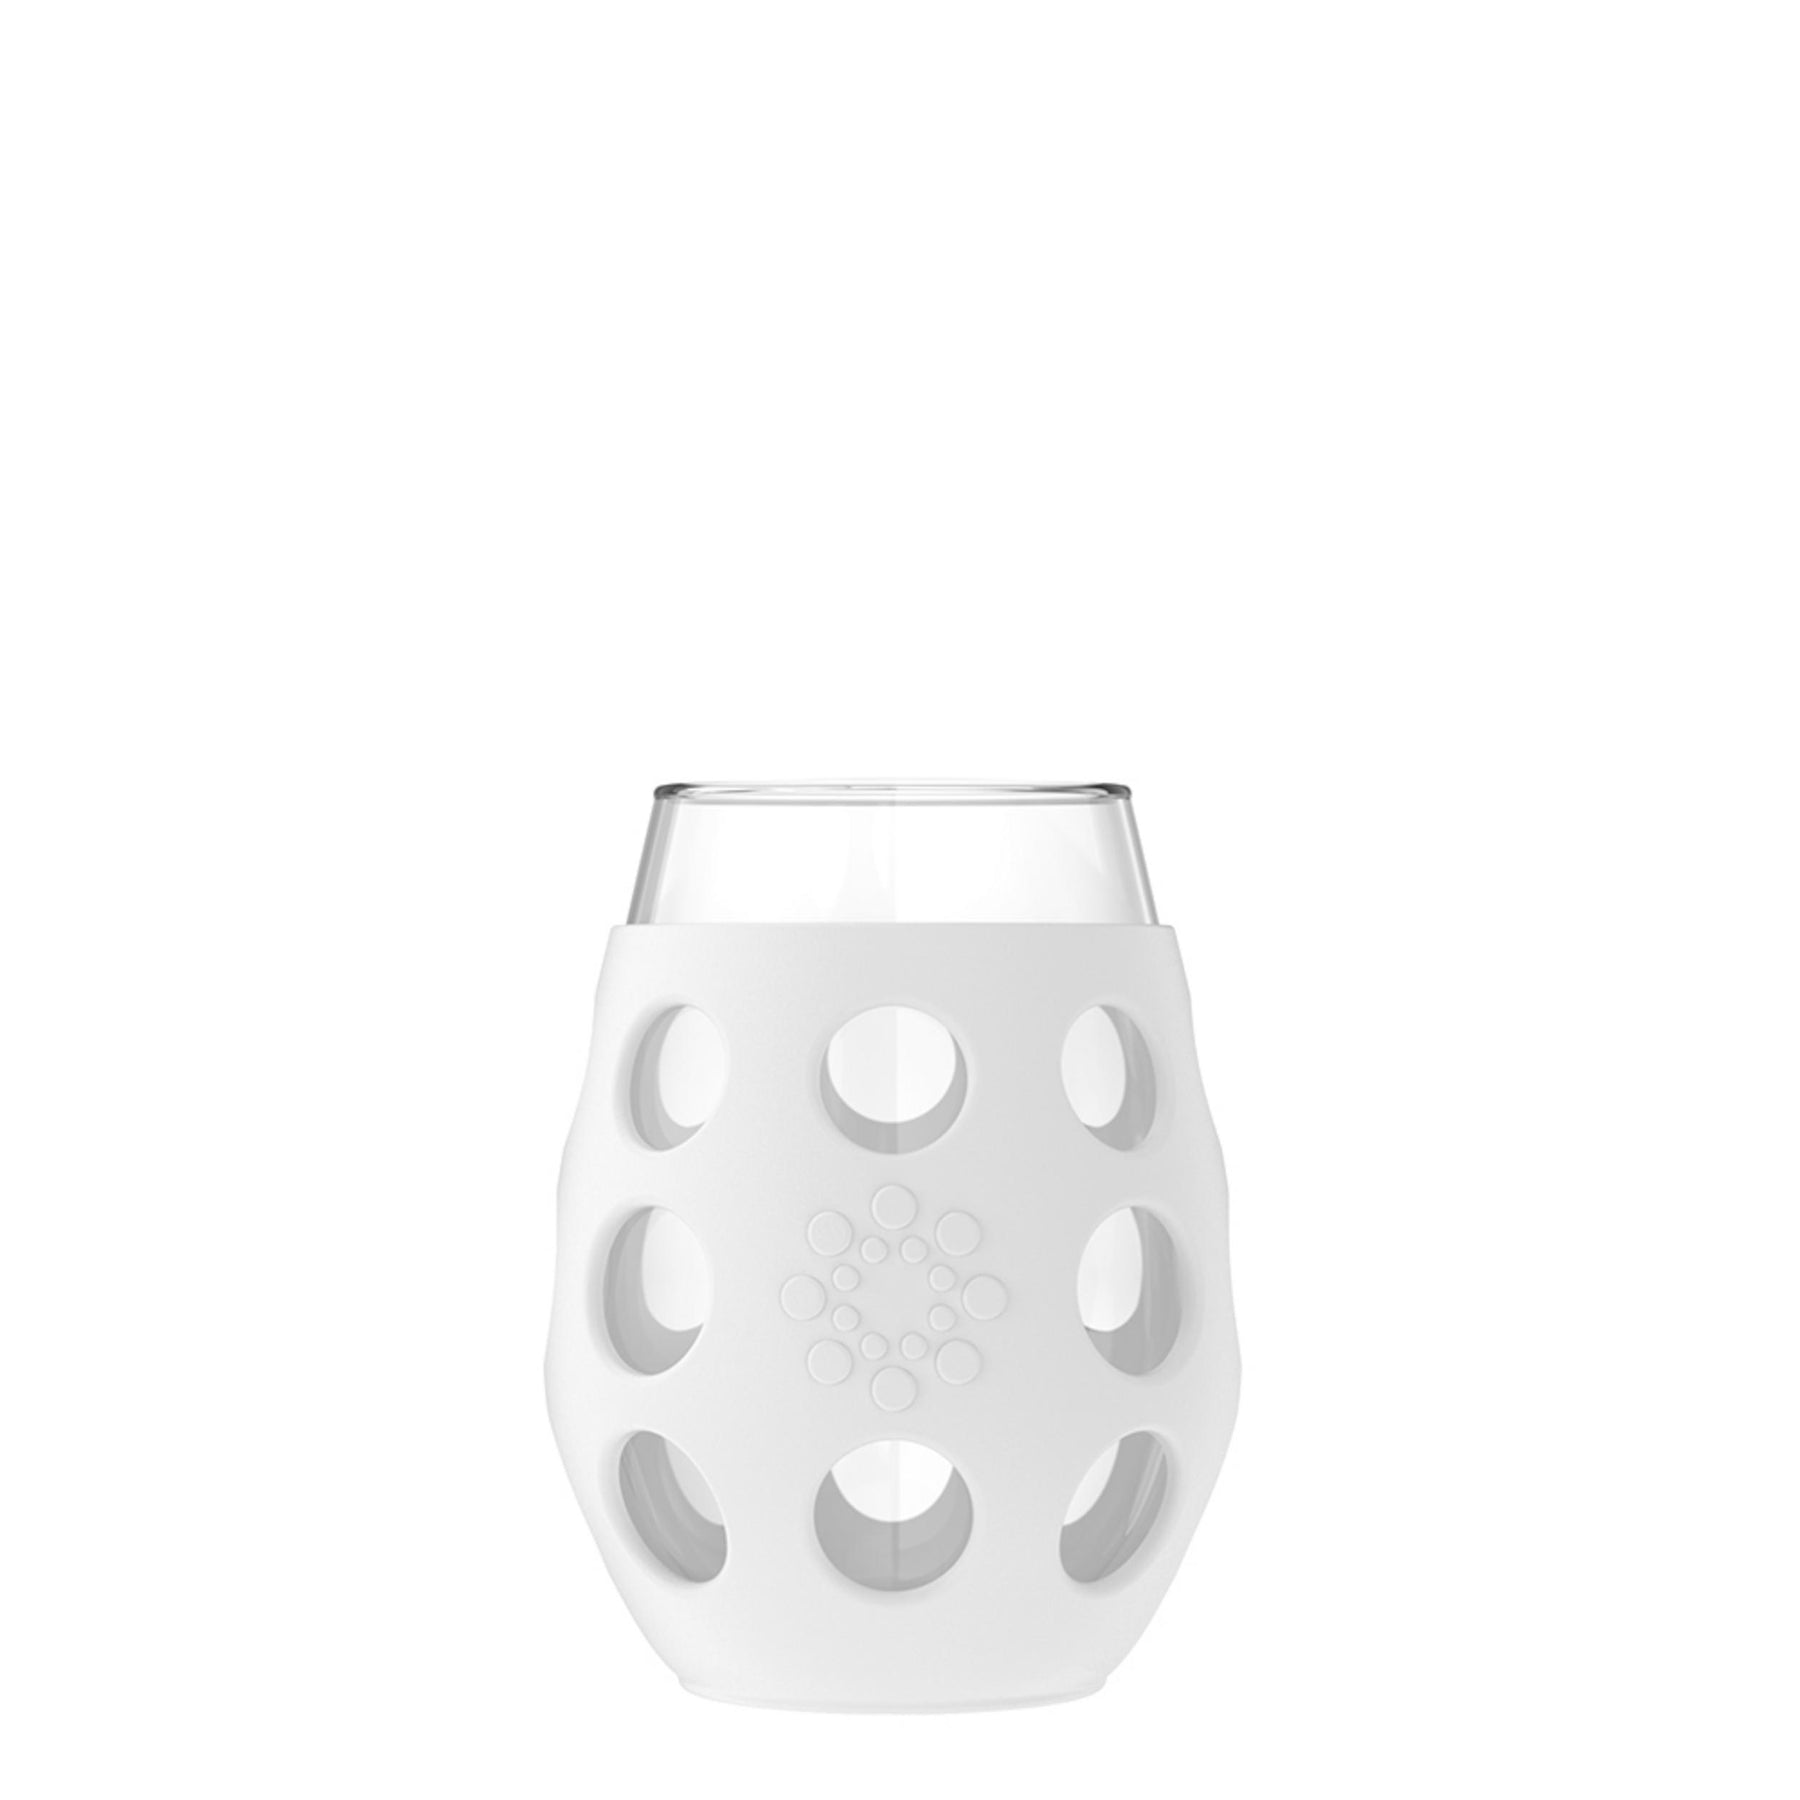 17oz Wine Glass with Silicone Sleeve-2 Pack | Lifefactory Optic White